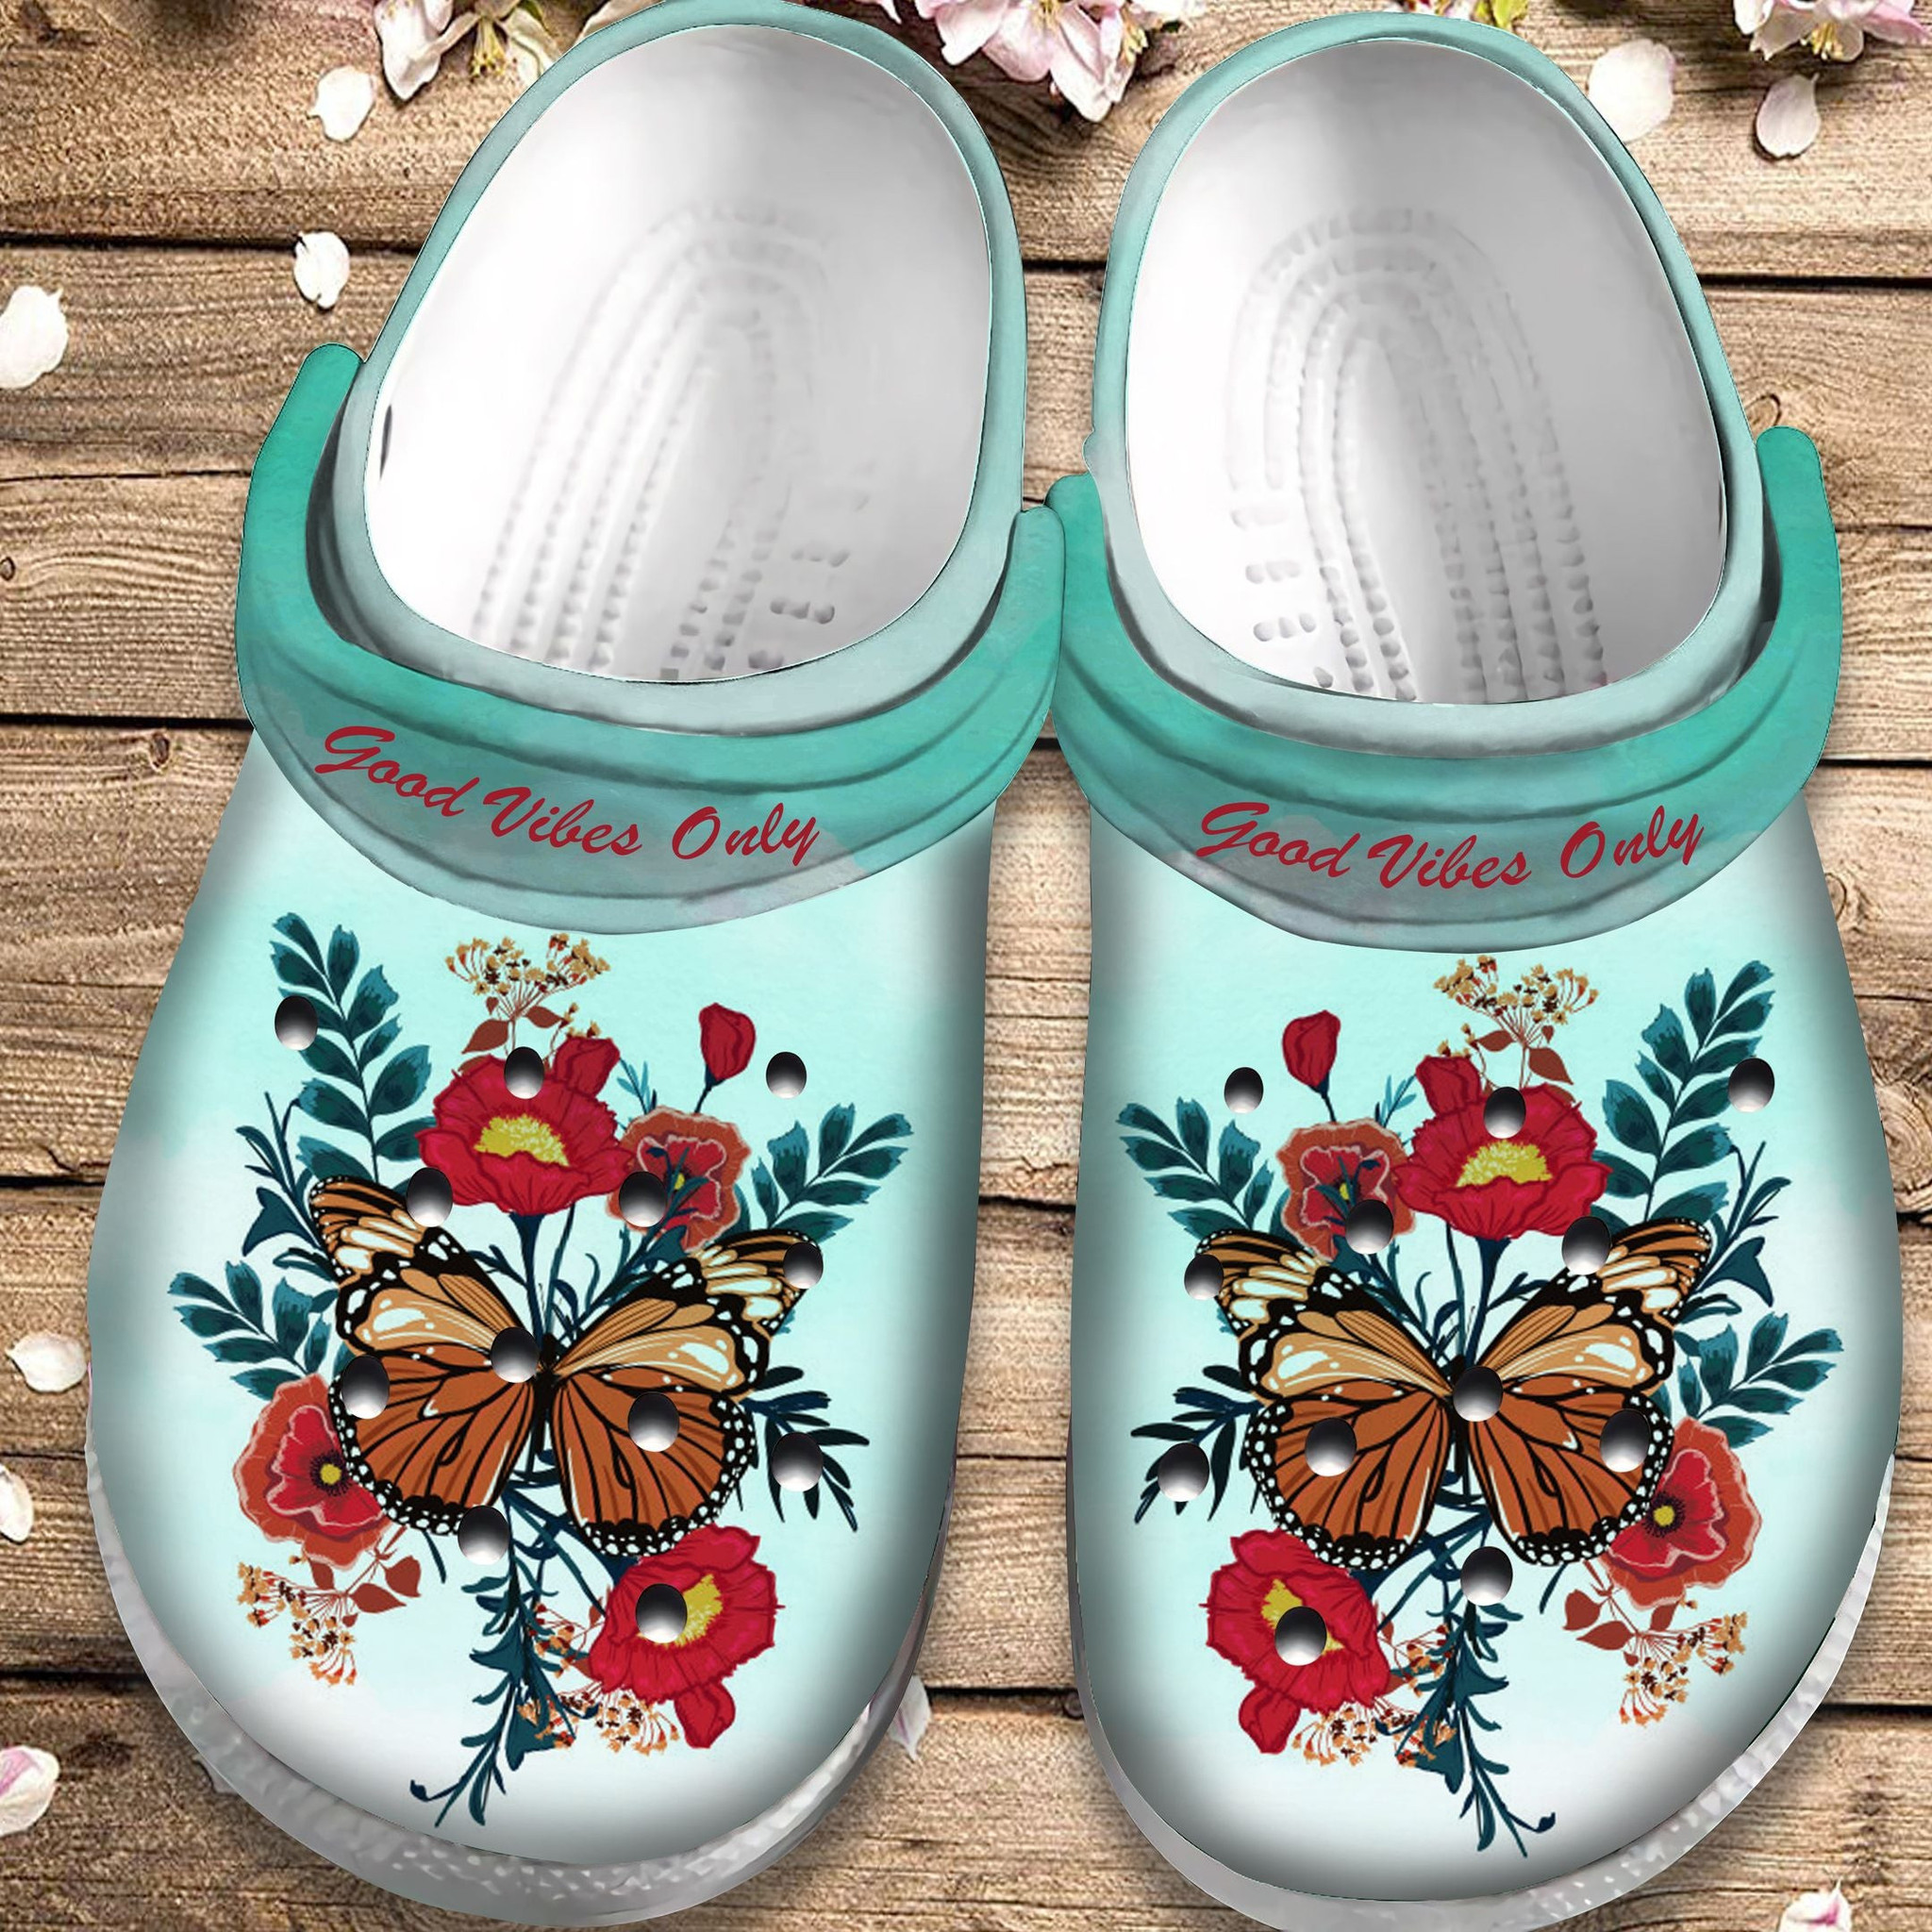 Good Vibes Only Crocs Clog Shoes - Red Flower And Butterfly Outdoor Crocs Clog Shoes Birthday Gift For Women Girl Mother Daughter Sister Friend